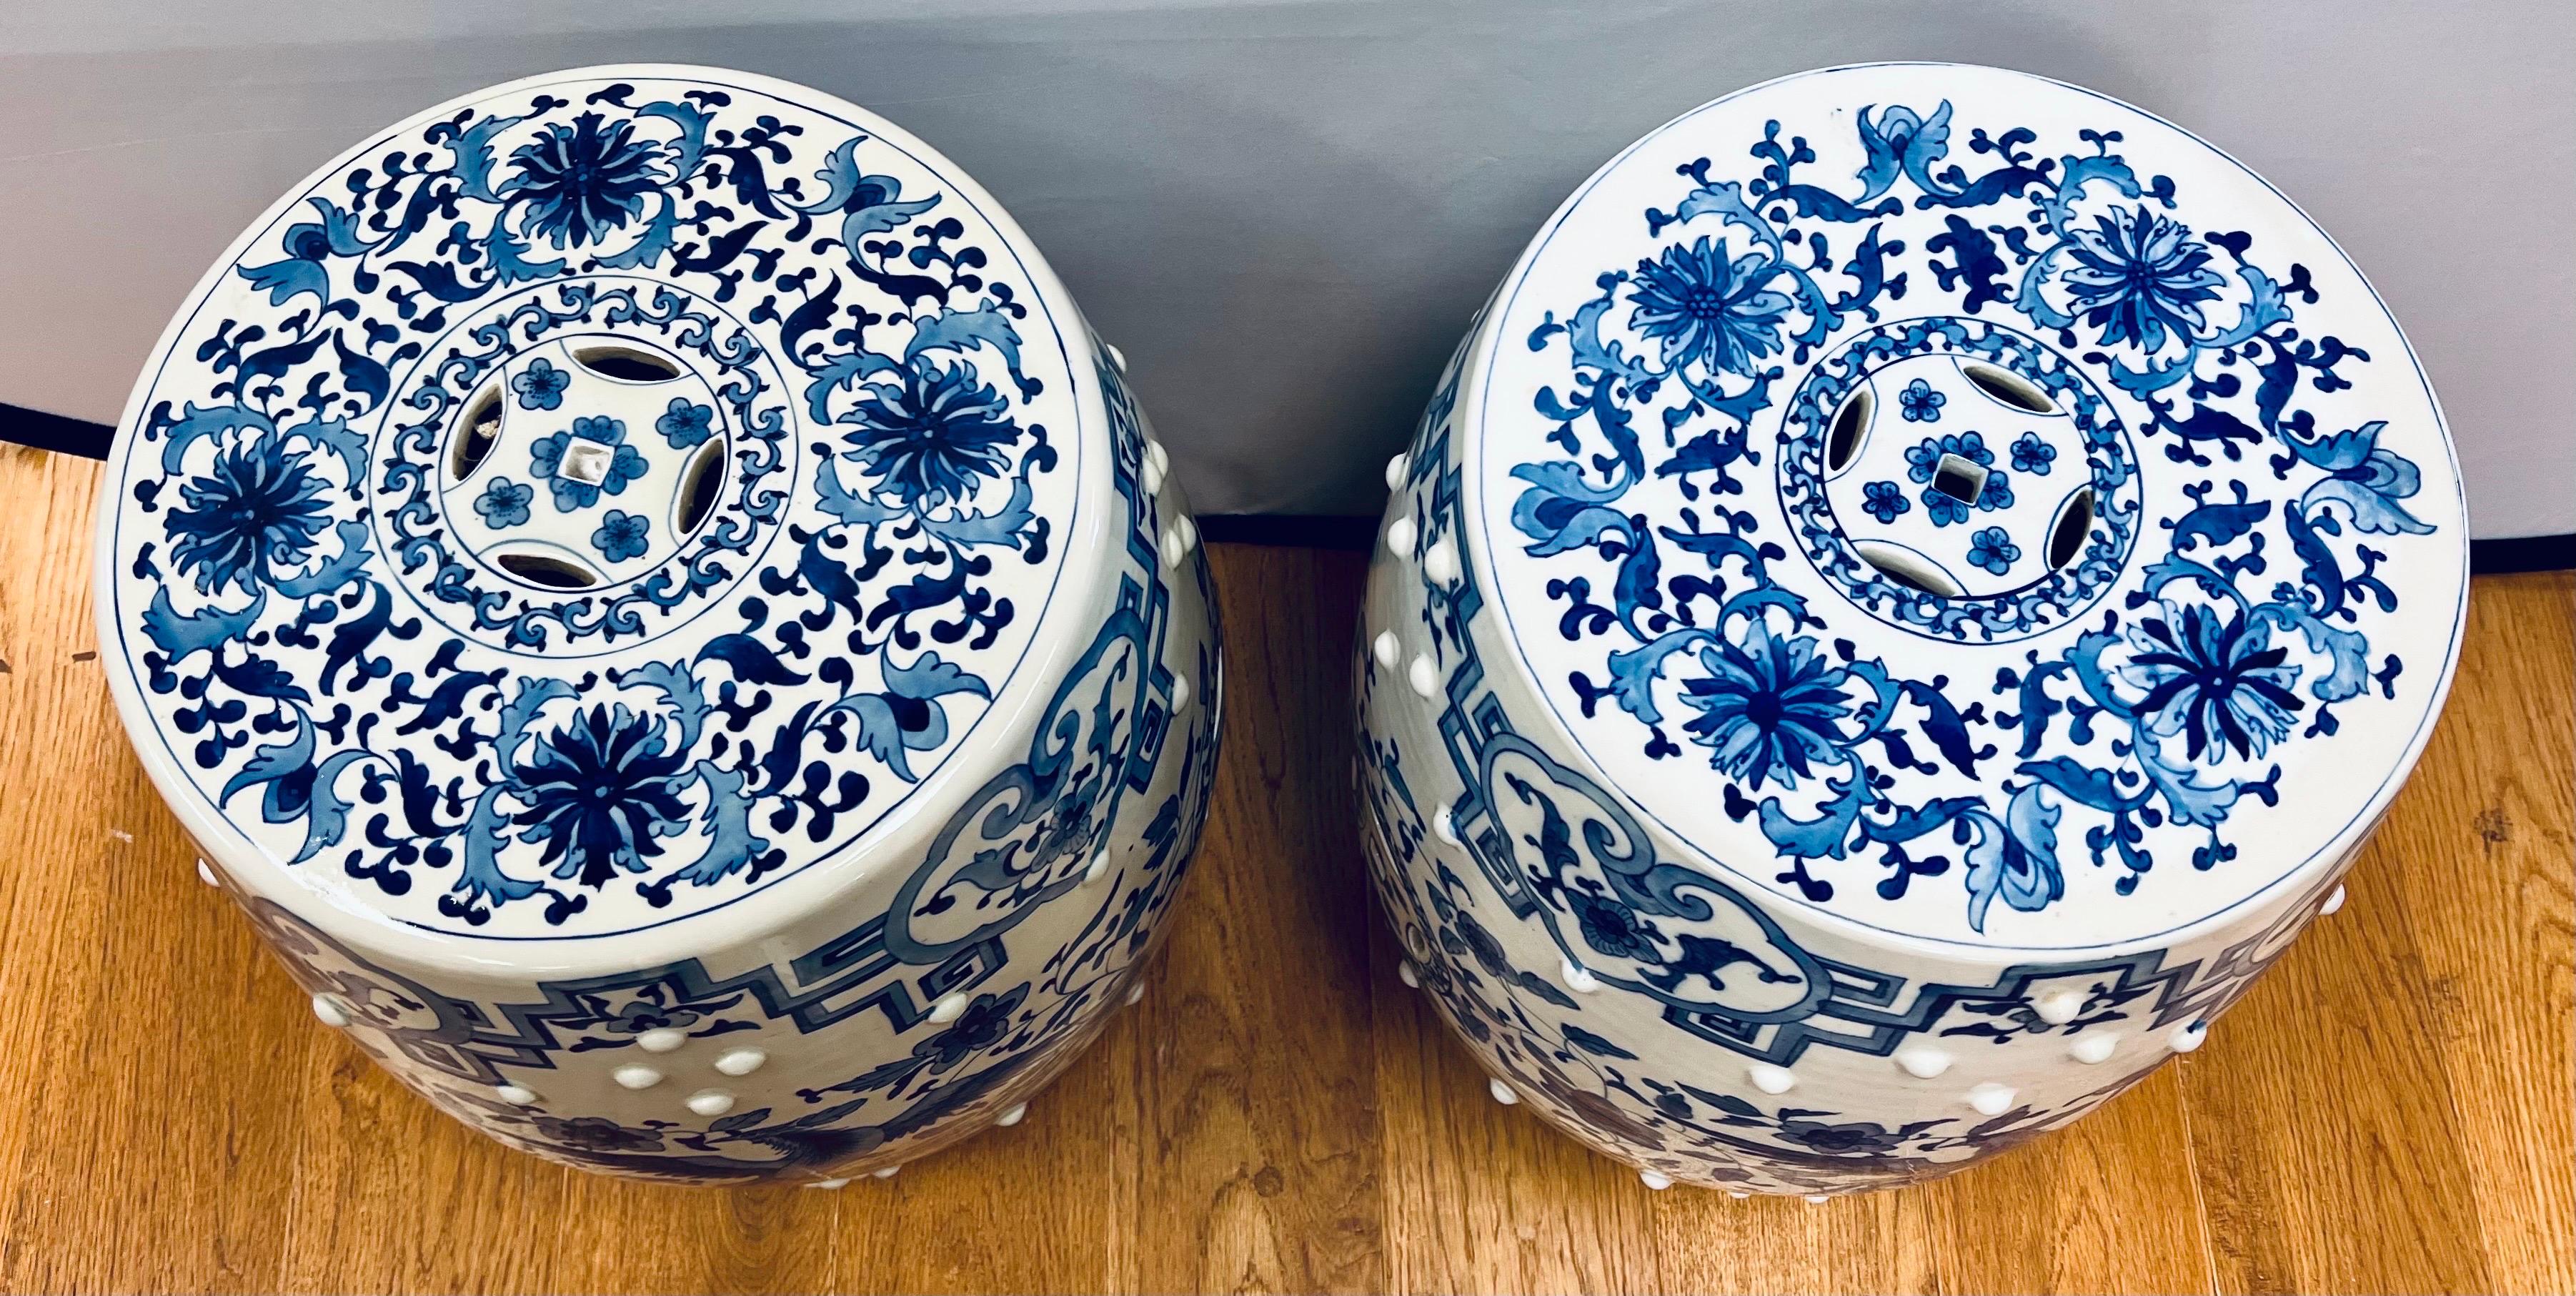 Pair of Blue and White Chinoiserie Chinese Porcelain Ceramic Garden Stools 1